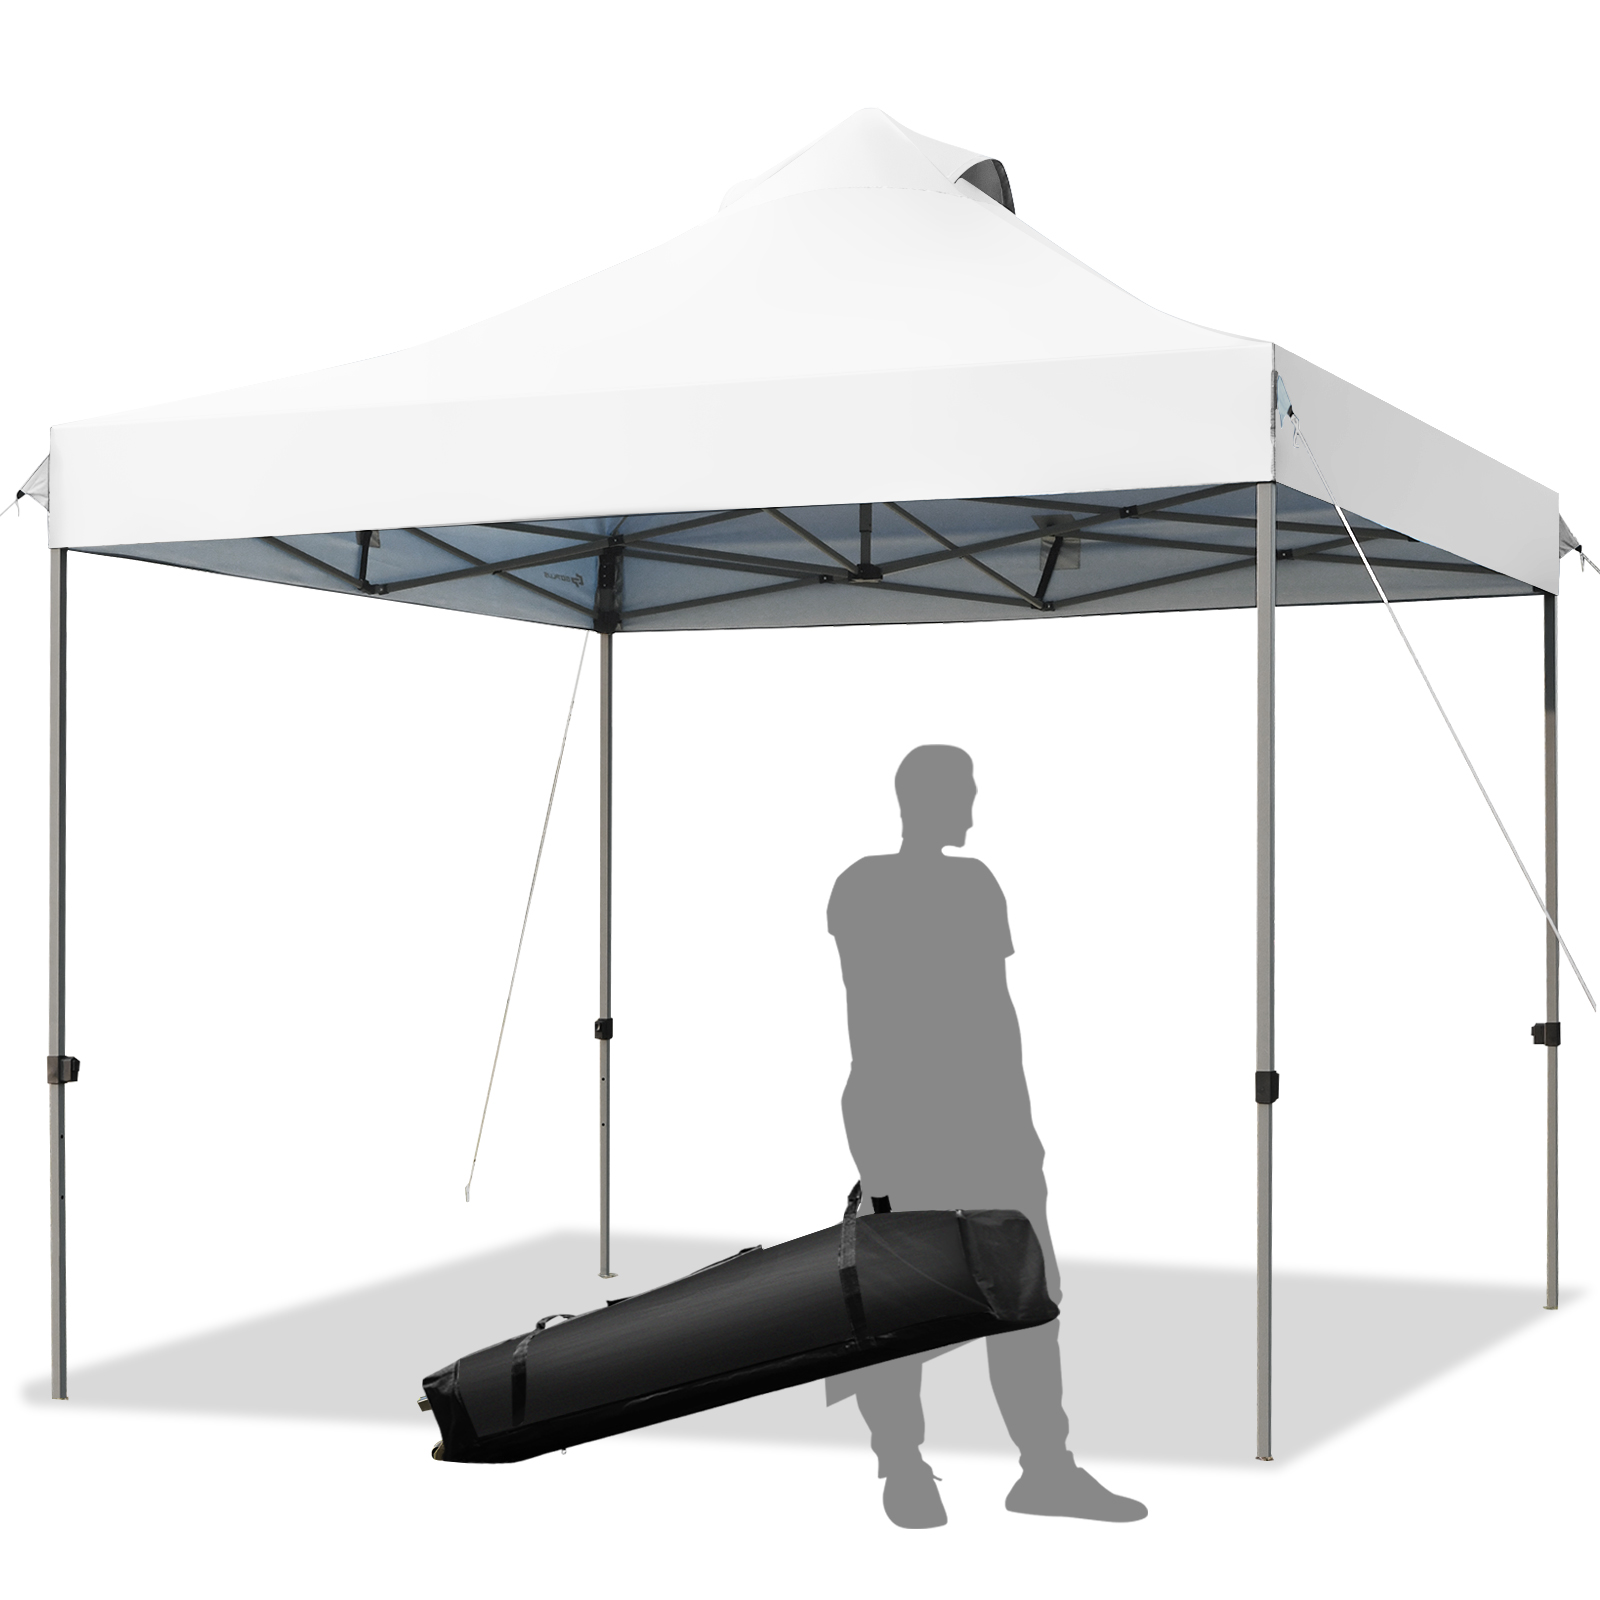 3m_x_3m_Pop_Up_Canopy_Tent_Commercial_Instant_Shelter_White-4.jpg